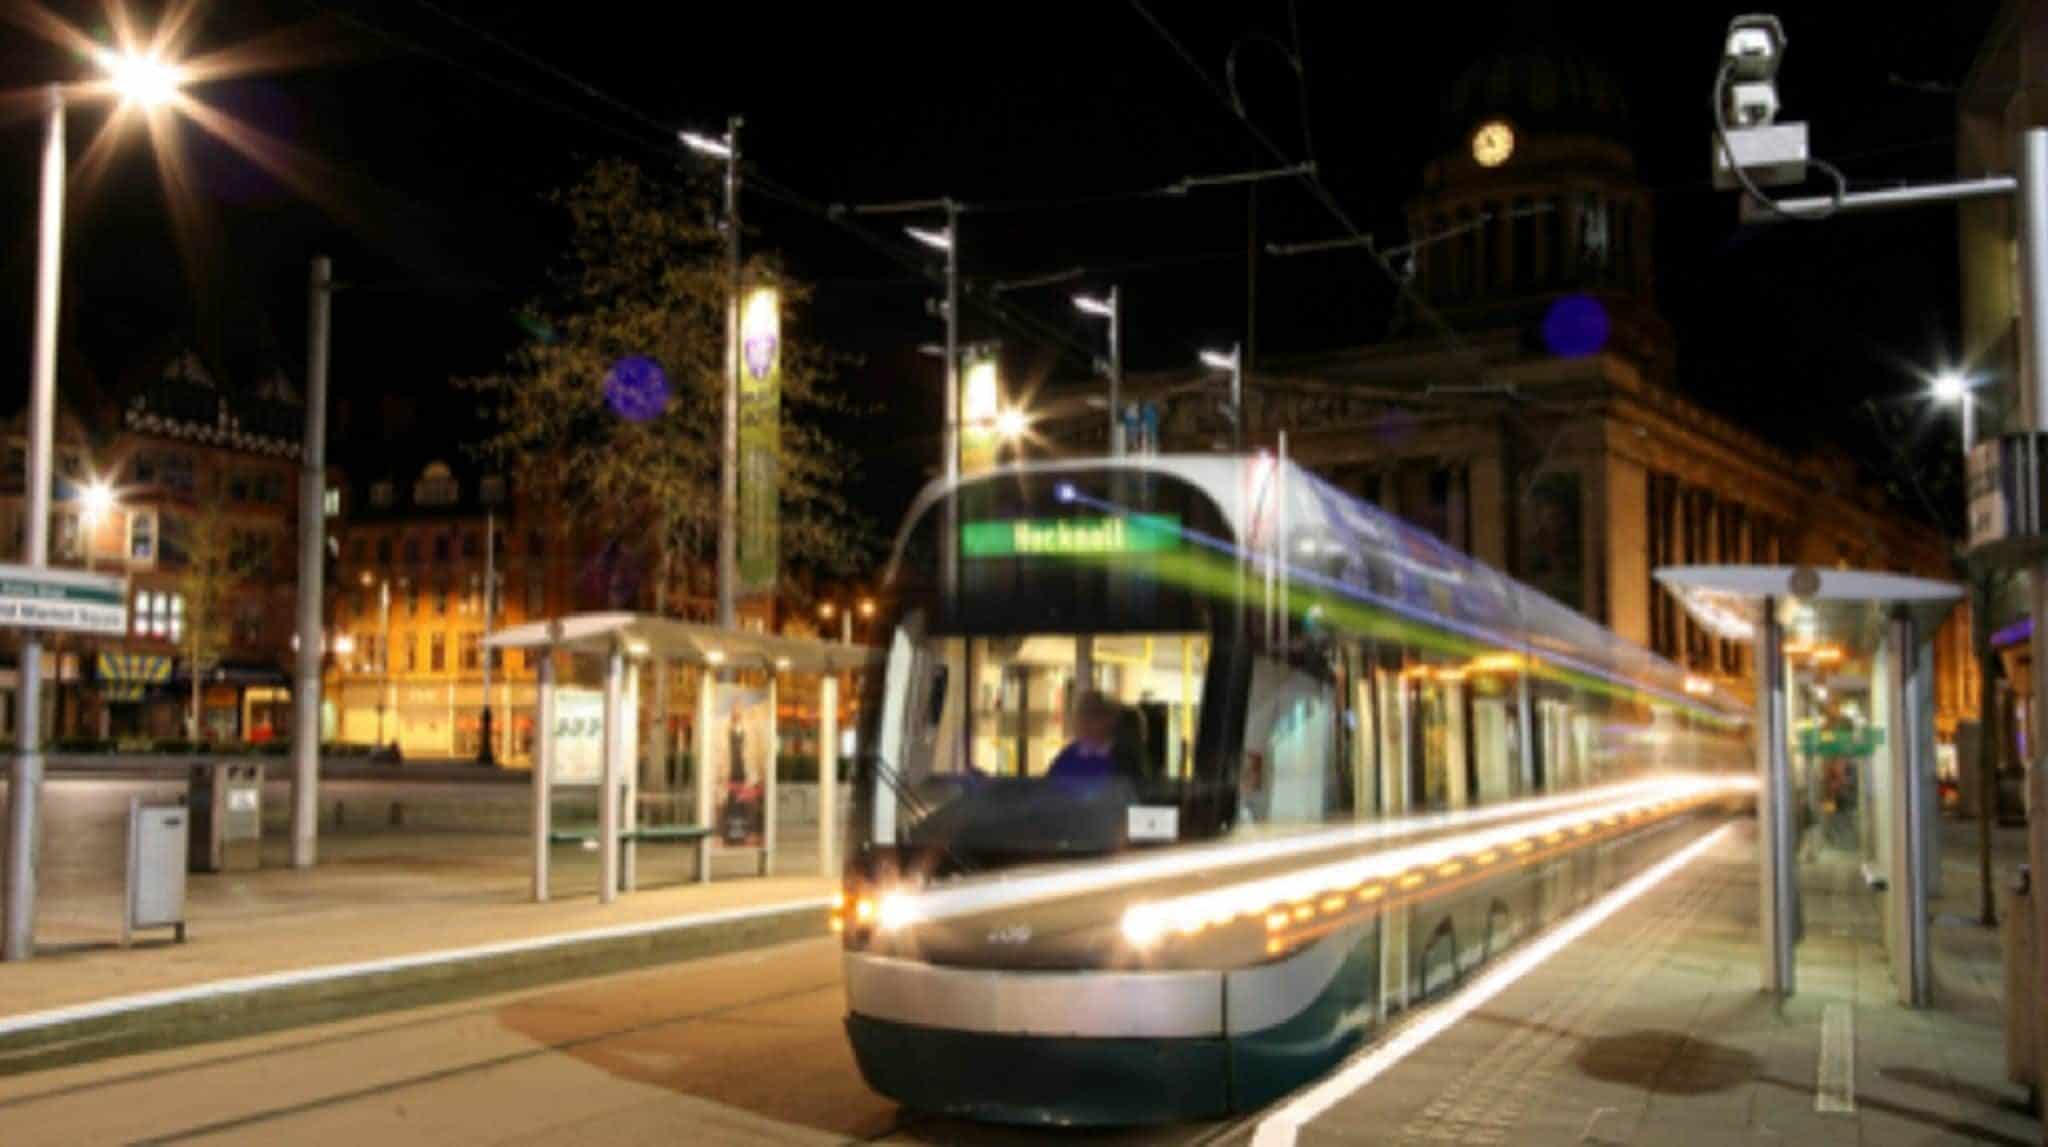 Tram in motion in Nottingham city centre at night